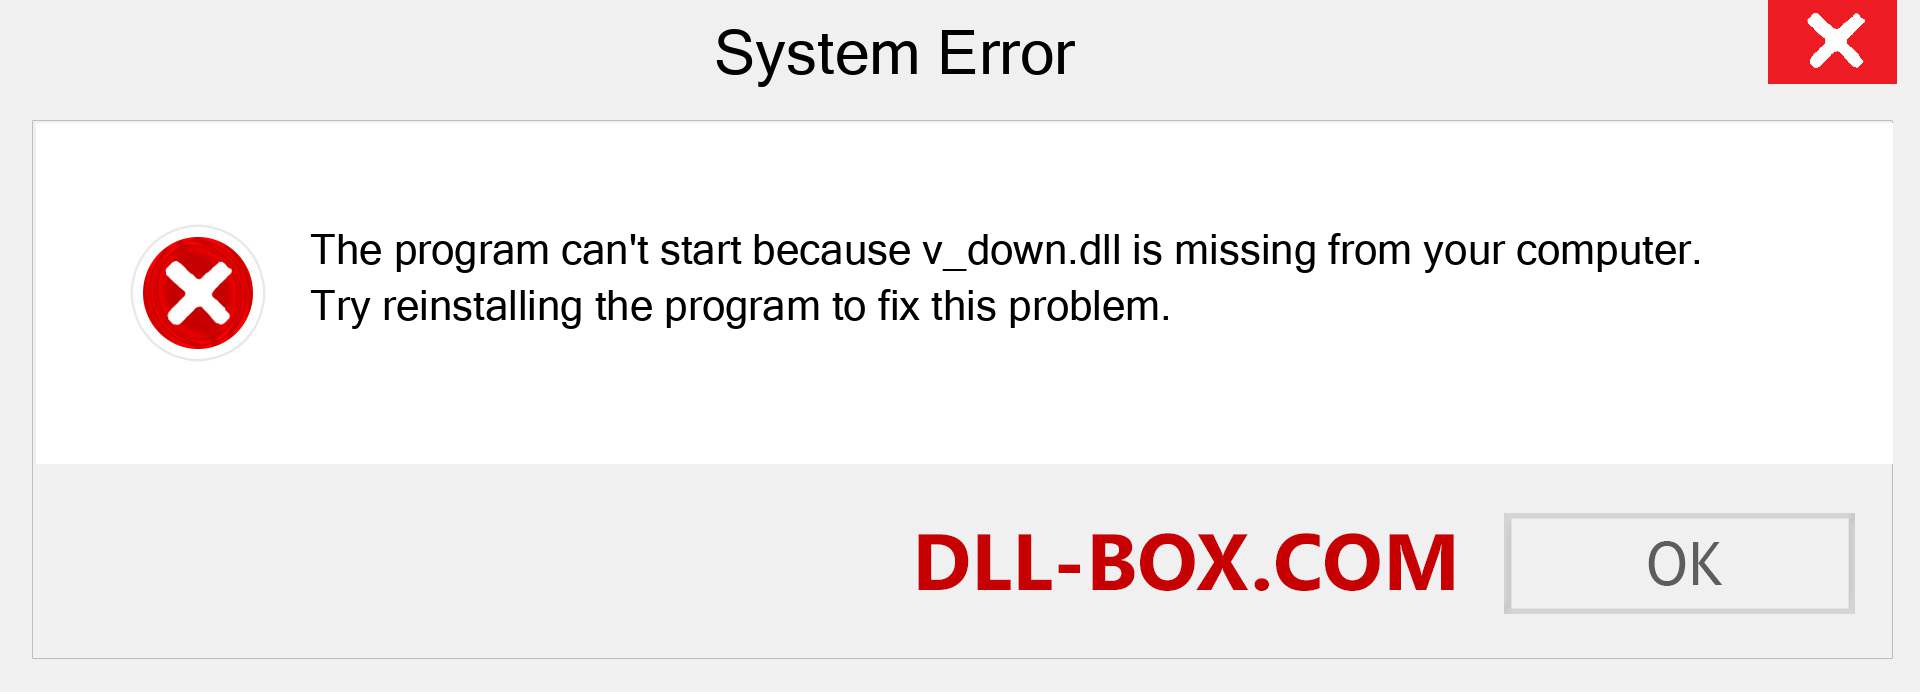  v_down.dll file is missing?. Download for Windows 7, 8, 10 - Fix  v_down dll Missing Error on Windows, photos, images